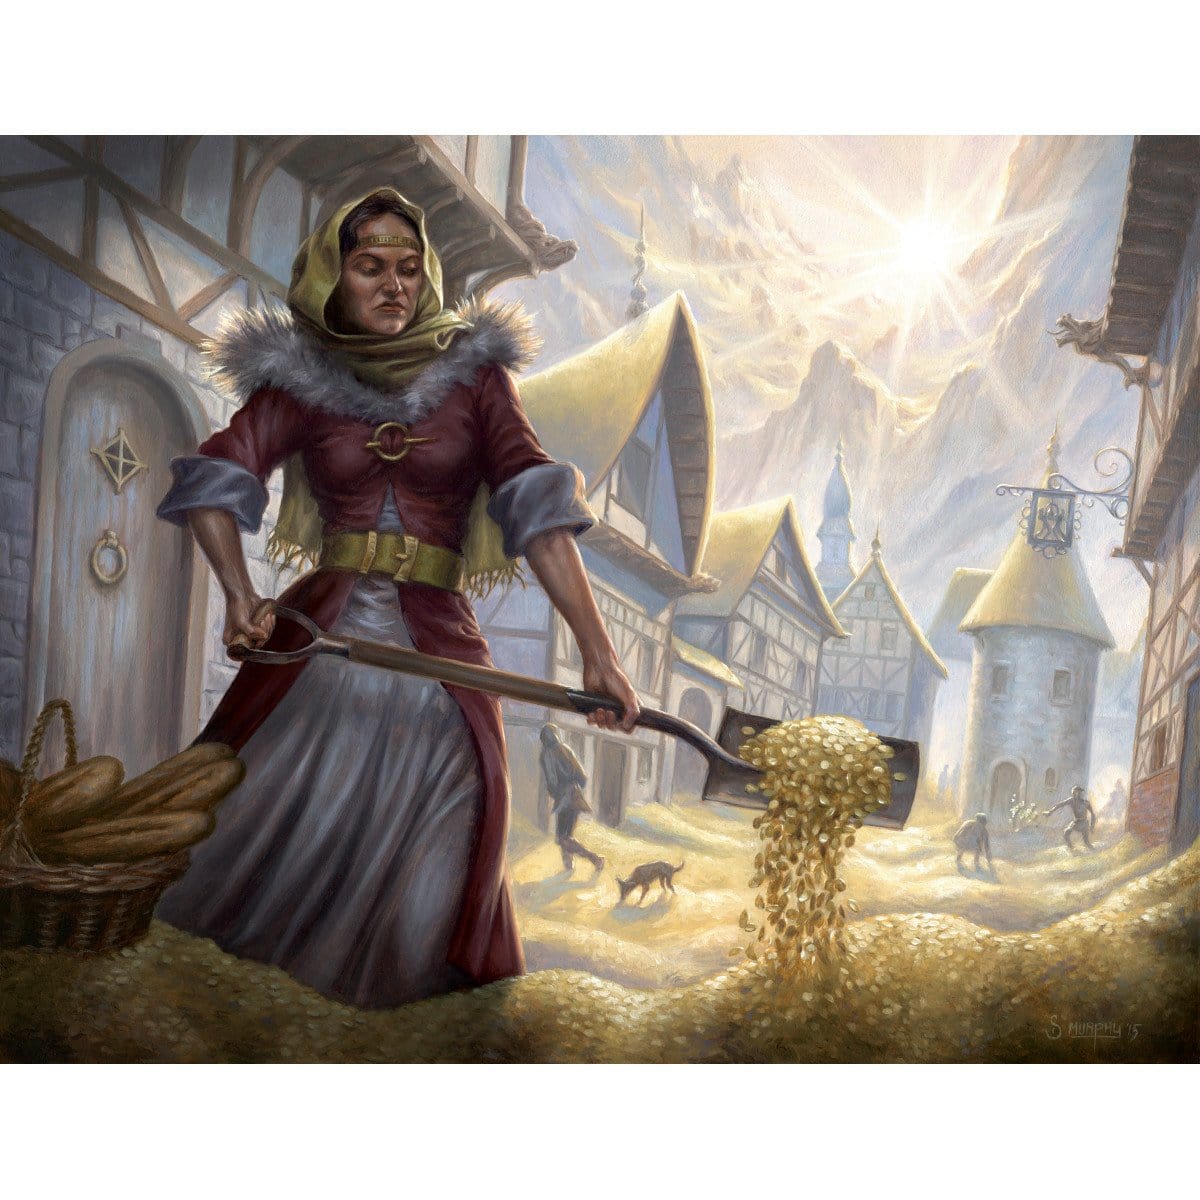 Windfall Print - Print - Original Magic Art - Accessories for Magic the Gathering and other card games